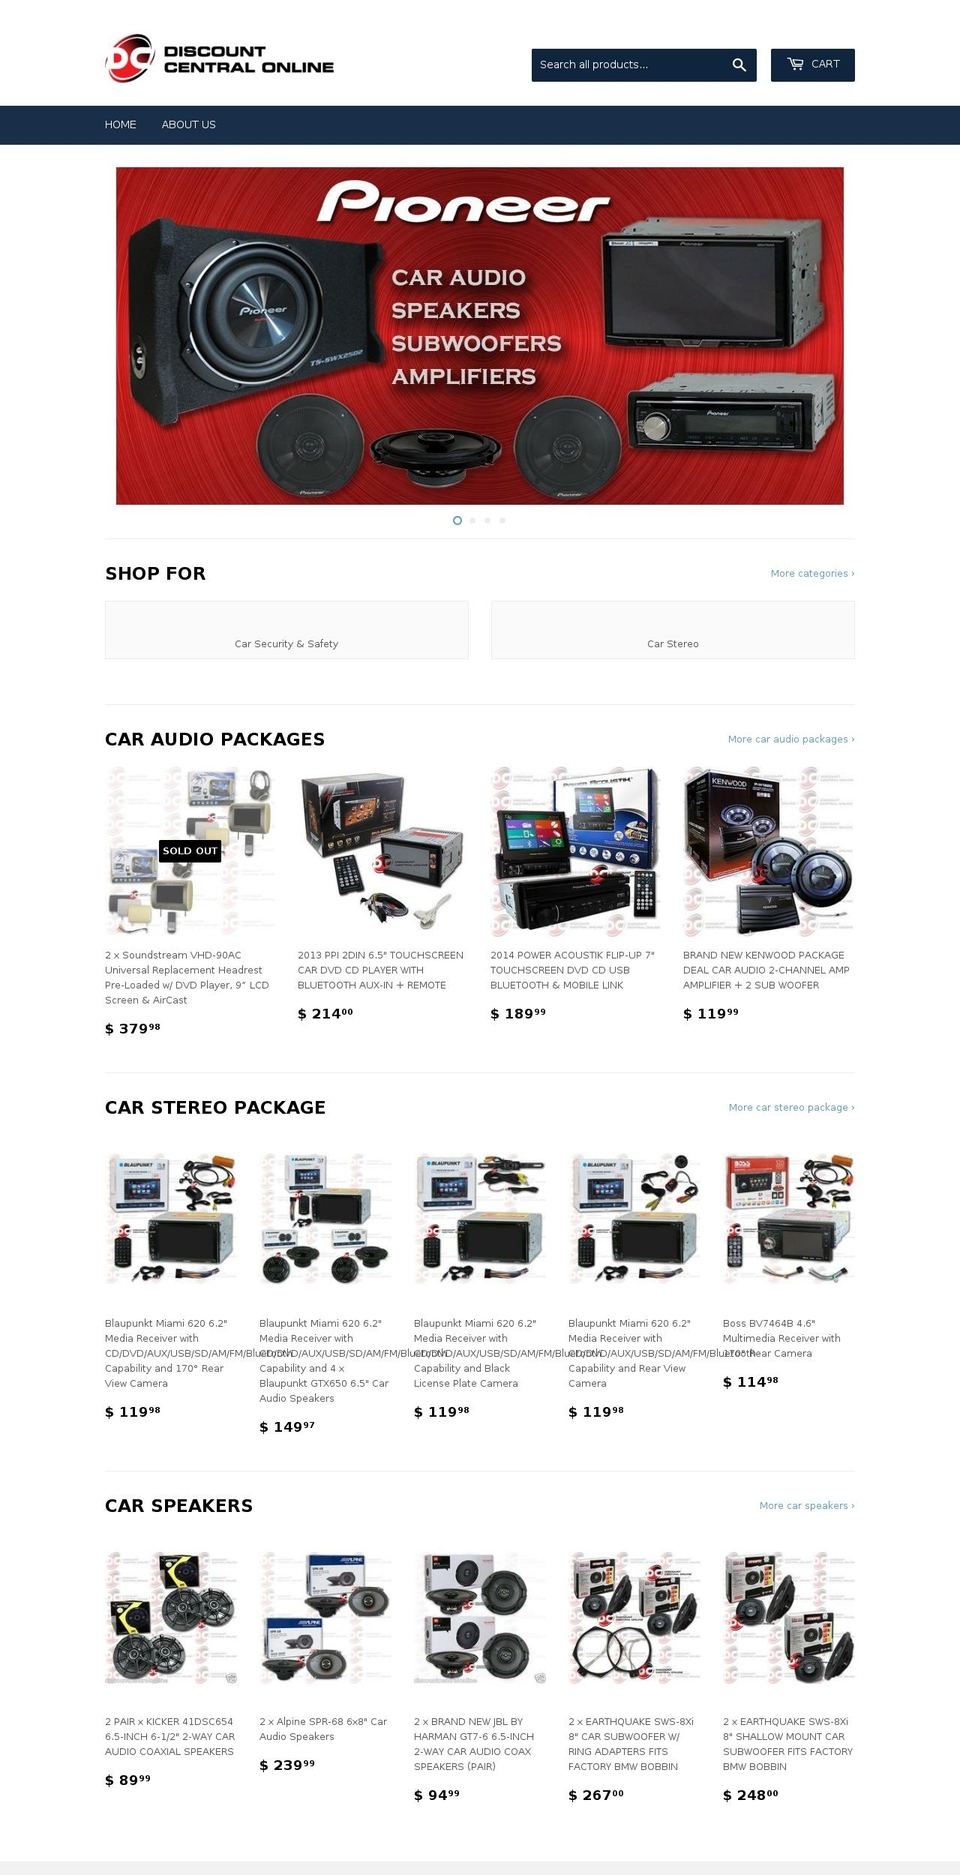 Supply Shopify theme site example discountcentralonline.com